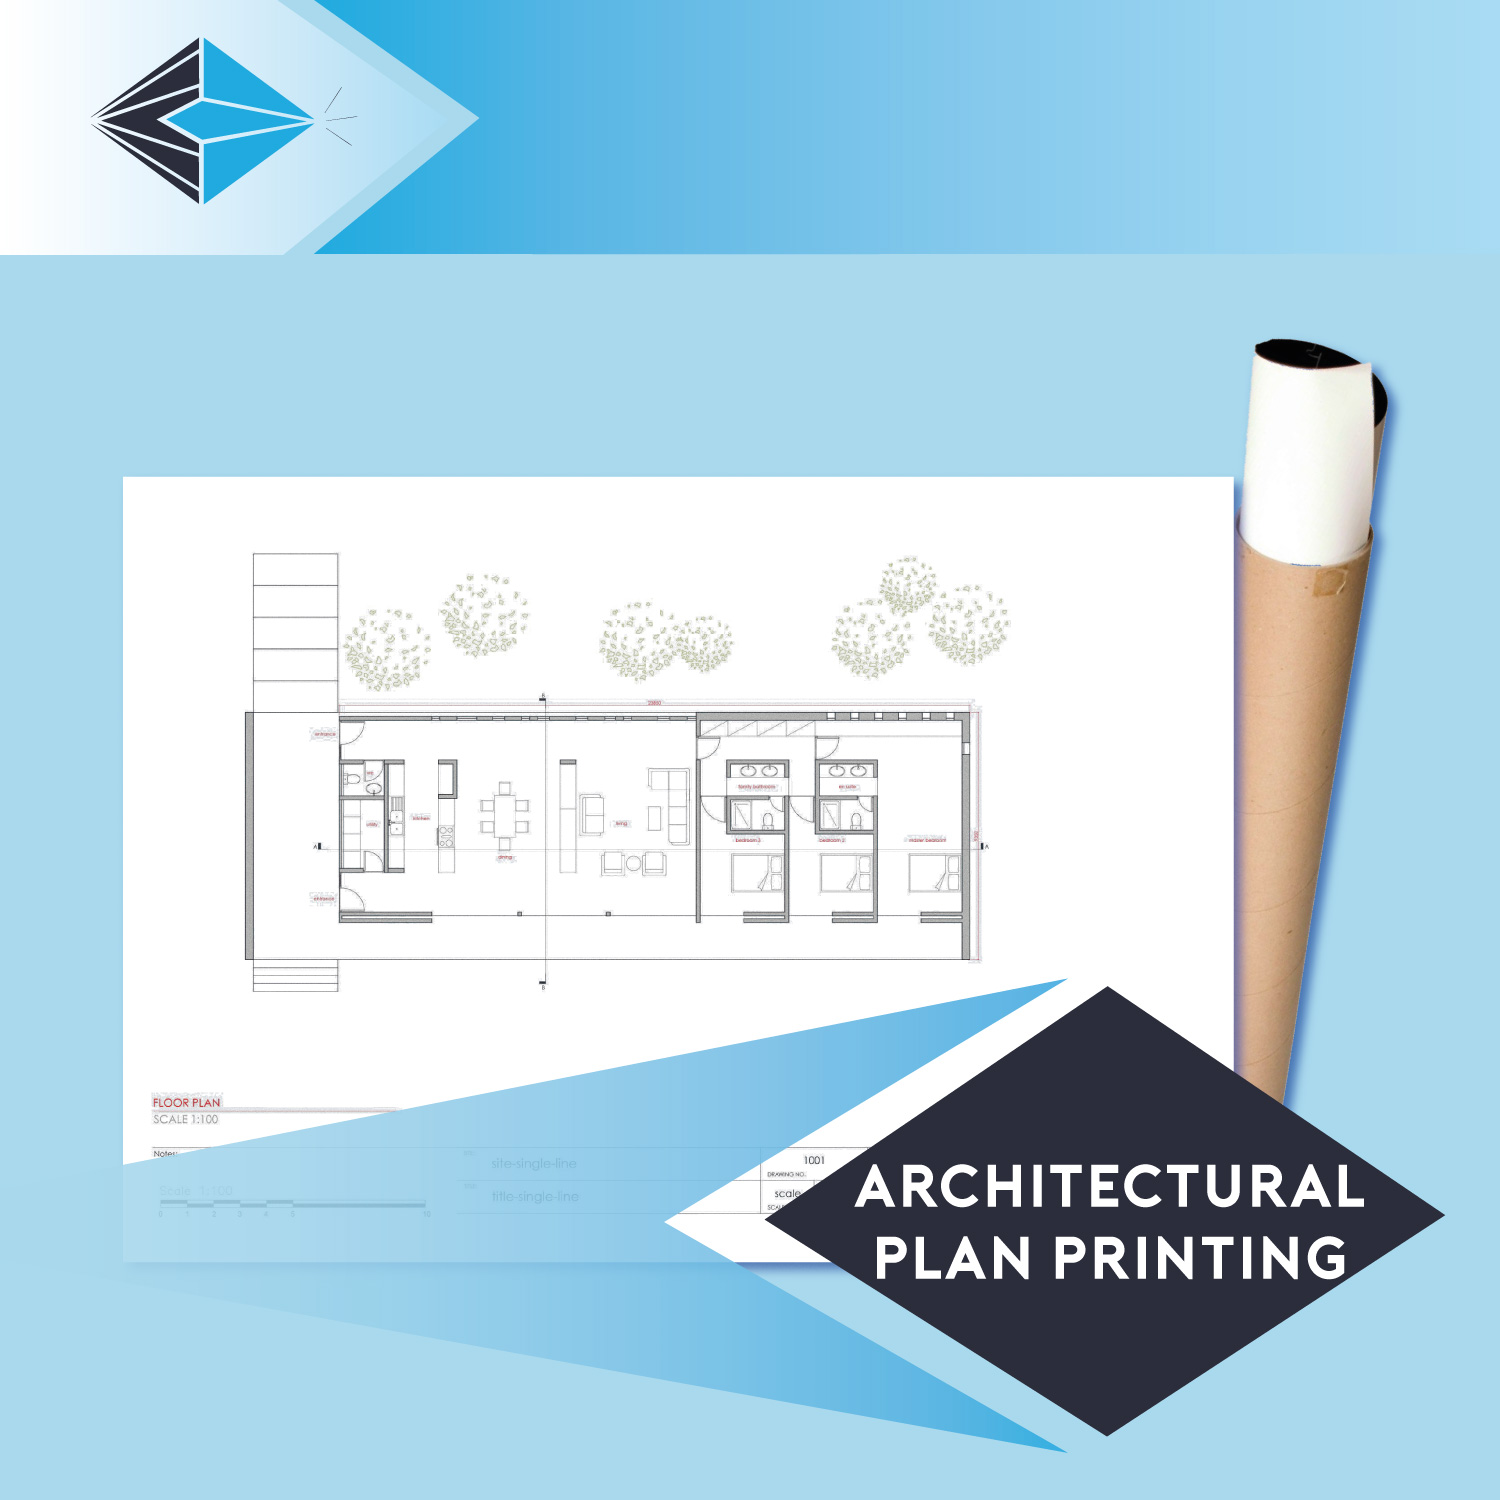 Architectural plan printing printing for architects and builders Stockport Manchester UK